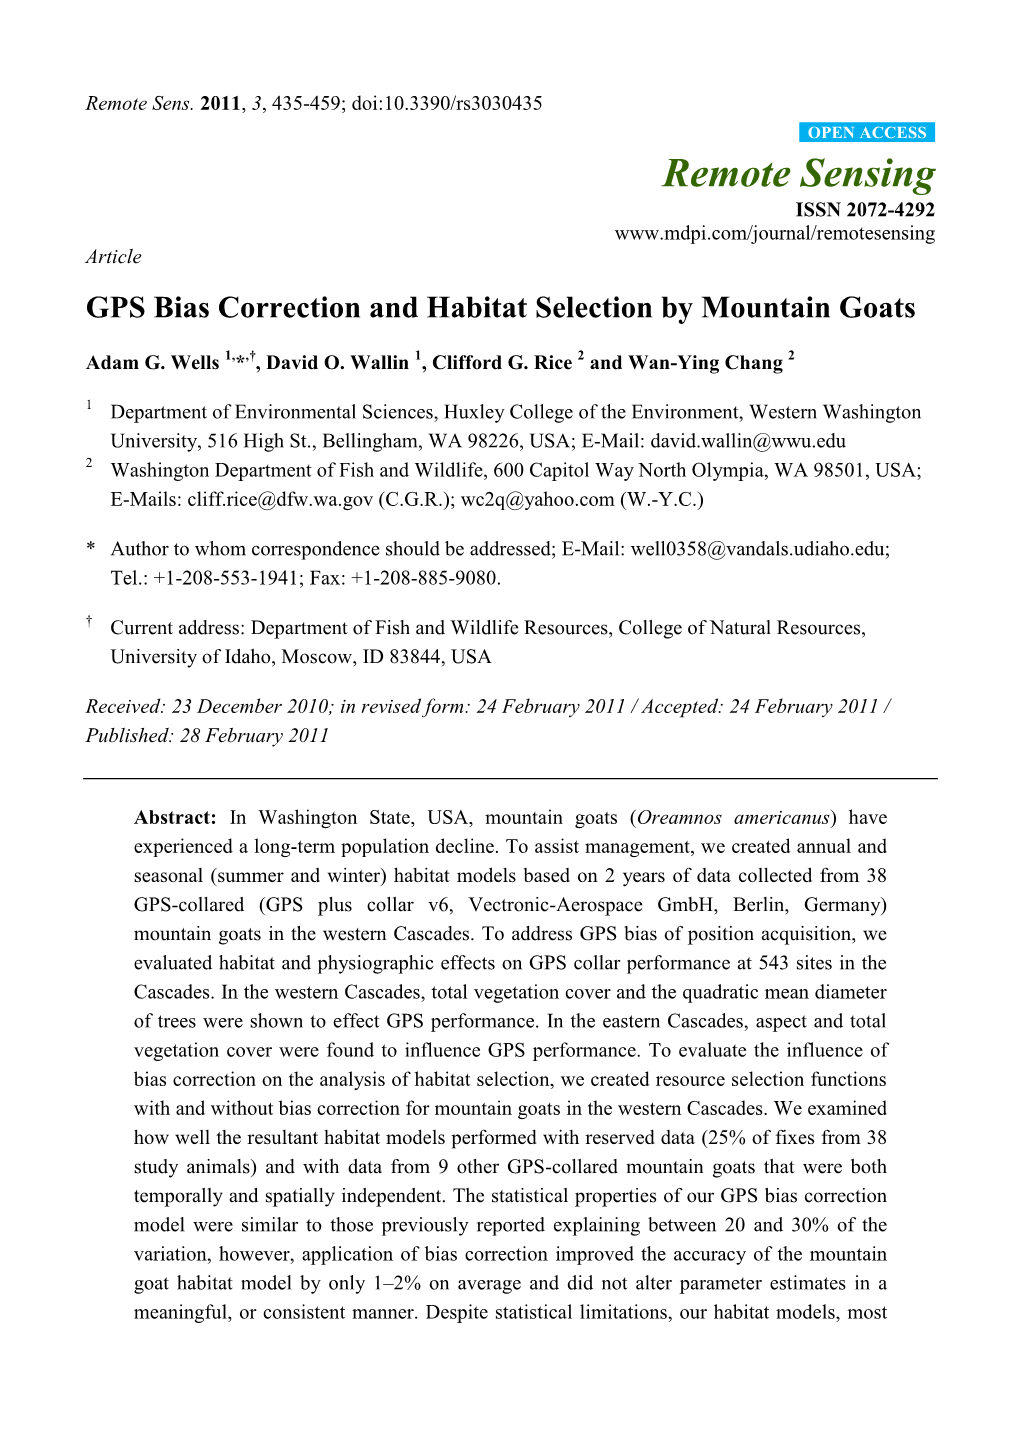 GPS Bias Correction and Habitat Selection by Mountain Goats